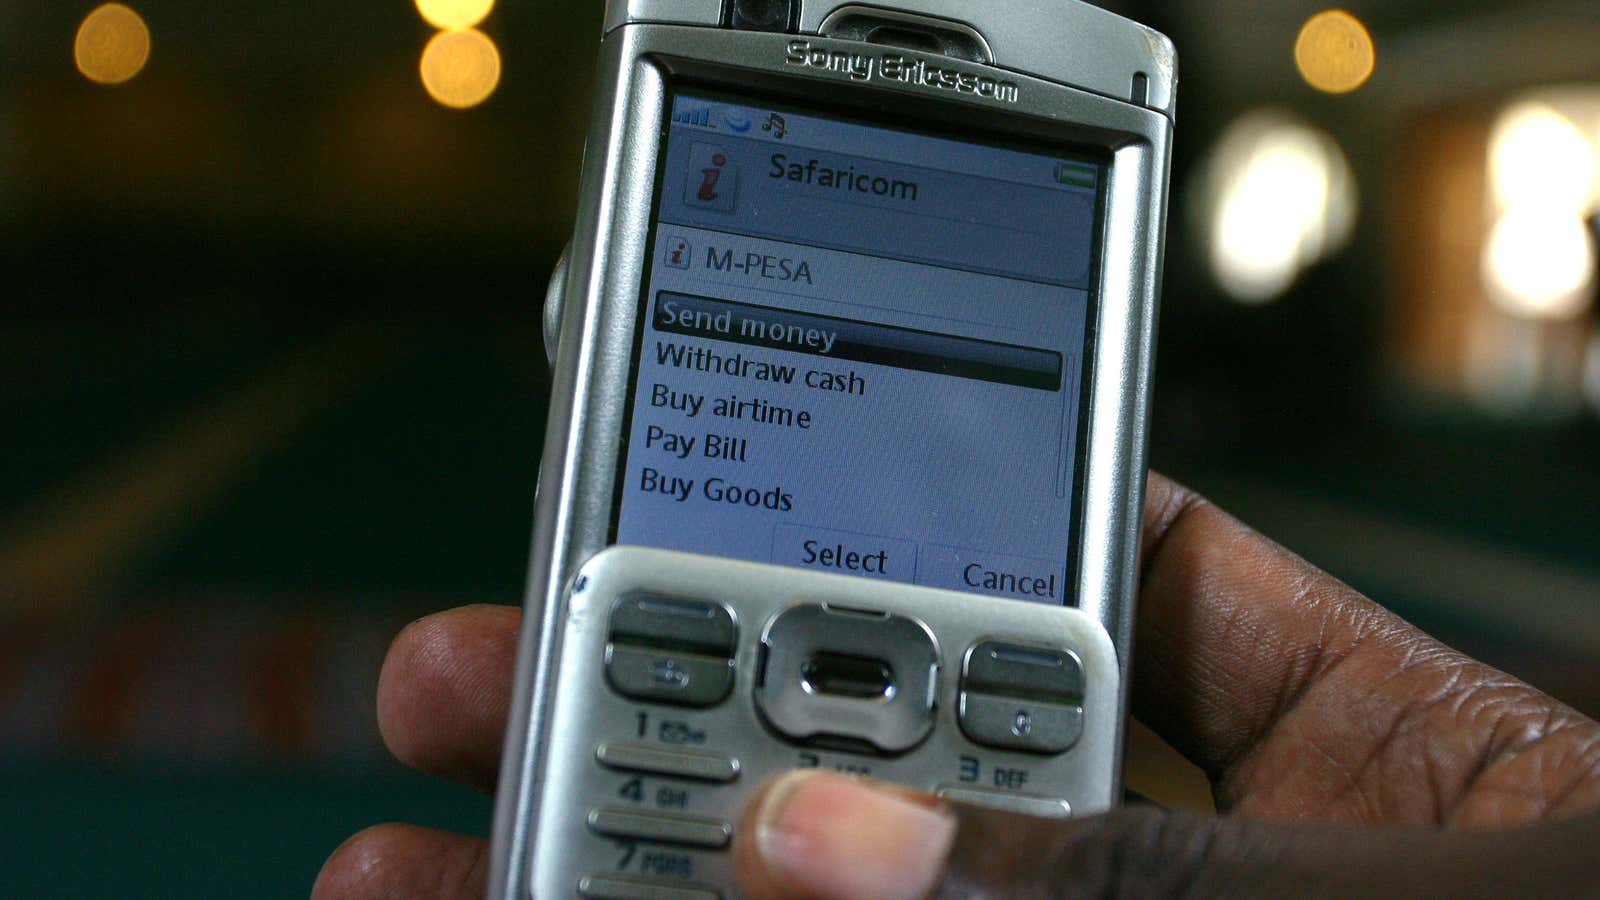 Apps like M-Pesa have given hope to people in countries with ineffective governments.